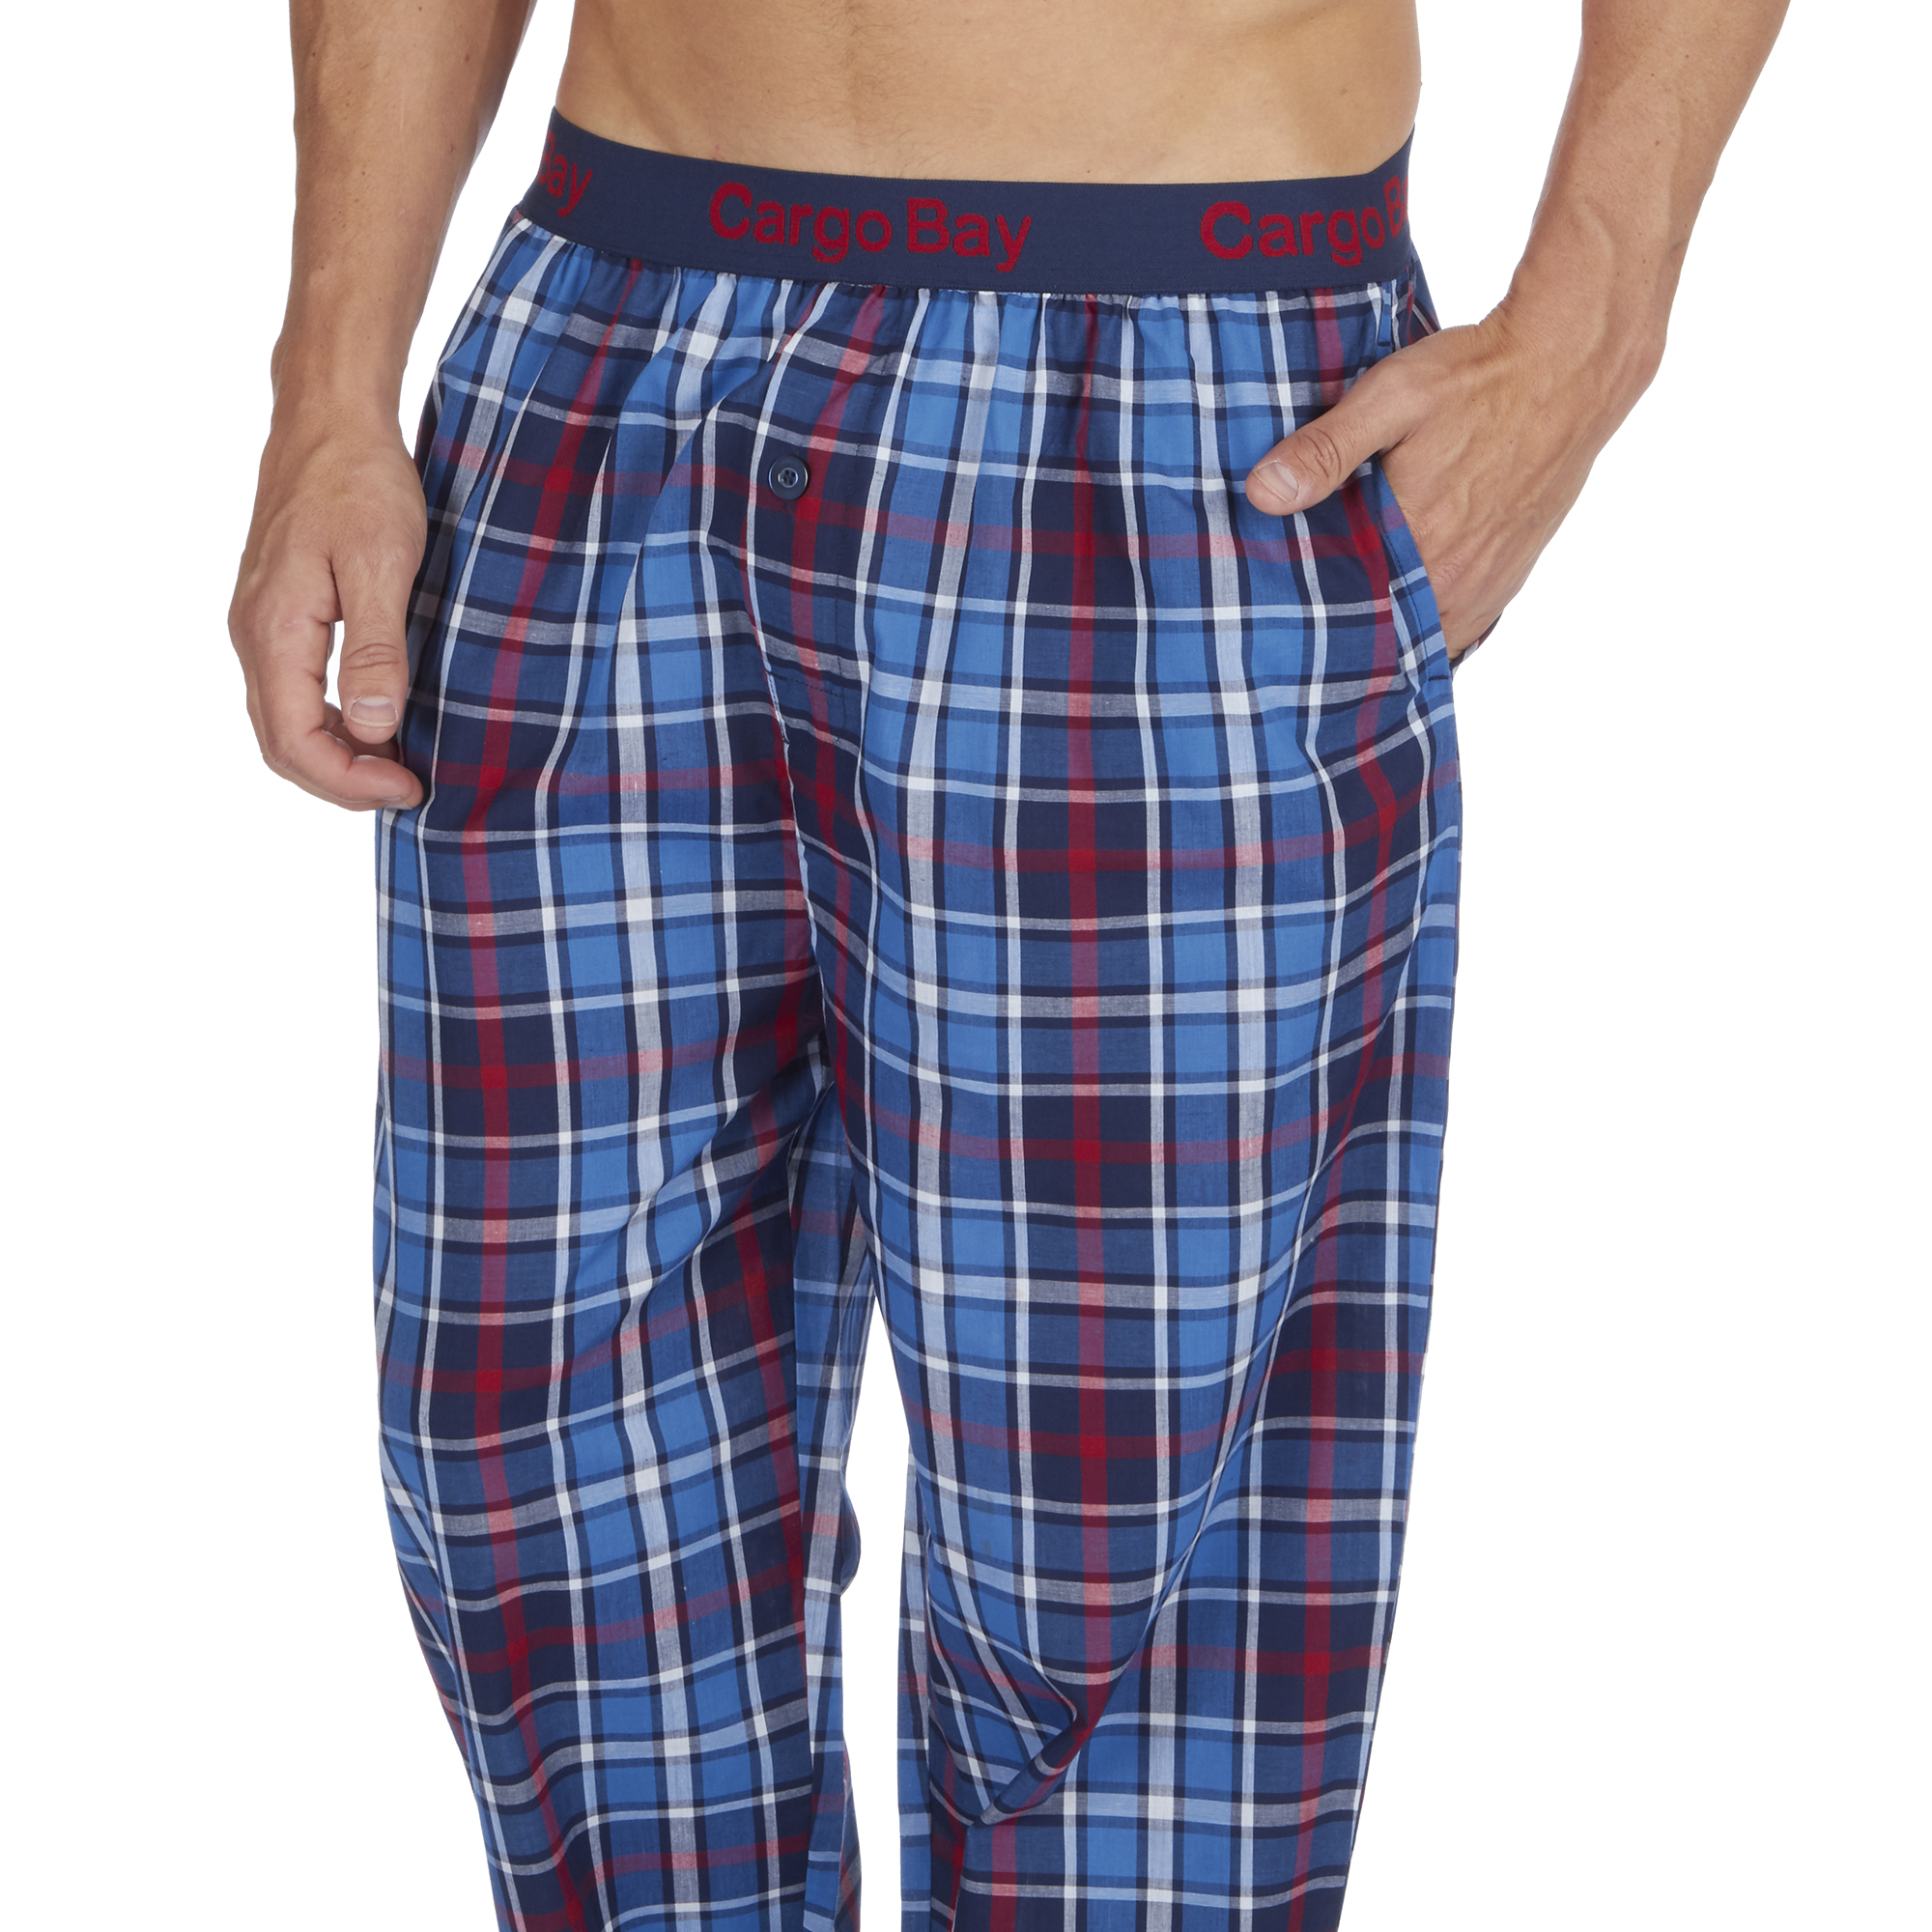 Men's Woven Checked Pajama PJ Bottoms Lounge Bed Pants Trousers Twill ...